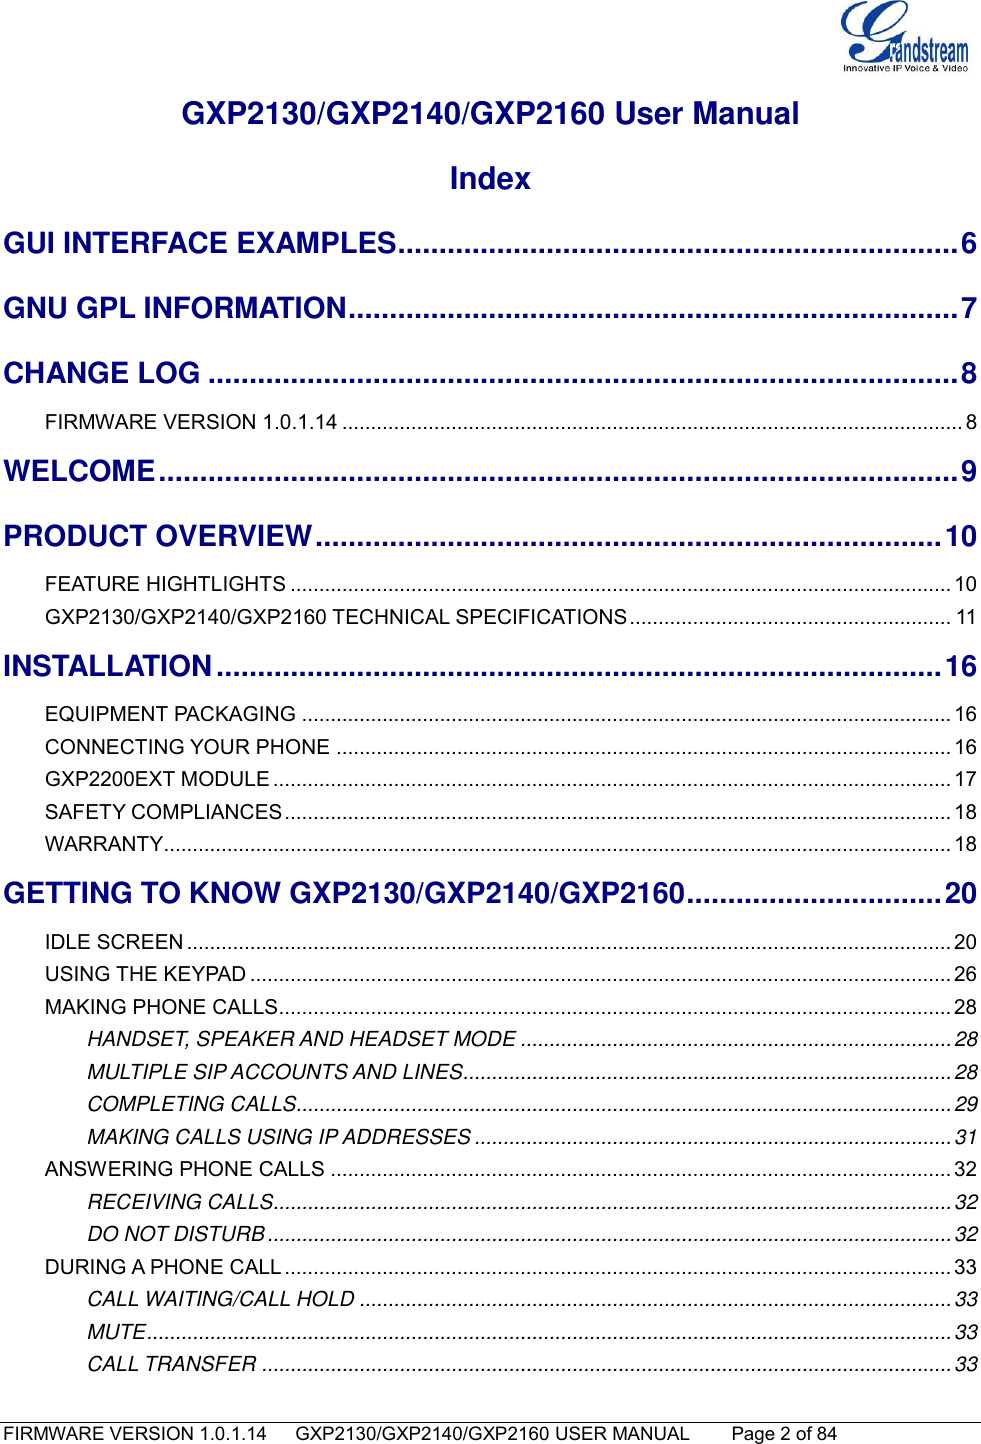   FIRMWARE VERSION 1.0.1.14      GXP2130/GXP2140/GXP2160 USER MANUAL     Page 2 of 84                                   GXP2130/GXP2140/GXP2160 User Manual Index GUI INTERFACE EXAMPLES .................................................................... 6 GNU GPL INFORMATION .......................................................................... 7 CHANGE LOG ........................................................................................... 8 FIRMWARE VERSION 1.0.1.14 ............................................................................................................ 8 WELCOME ................................................................................................. 9 PRODUCT OVERVIEW ............................................................................ 10 FEATURE HIGHTLIGHTS ................................................................................................................... 10 GXP2130/GXP2140/GXP2160 TECHNICAL SPECIFICATIONS ........................................................ 11 INSTALLATION ........................................................................................ 16 EQUIPMENT PACKAGING ................................................................................................................. 16 CONNECTING YOUR PHONE ........................................................................................................... 16 GXP2200EXT MODULE ...................................................................................................................... 17 SAFETY COMPLIANCES .................................................................................................................... 18 WARRANTY ......................................................................................................................................... 18 GETTING TO KNOW GXP2130/GXP2140/GXP2160 ............................... 20 IDLE SCREEN ..................................................................................................................................... 20 USING THE KEYPAD .......................................................................................................................... 26 MAKING PHONE CALLS..................................................................................................................... 28 HANDSET, SPEAKER AND HEADSET MODE ........................................................................... 28 MULTIPLE SIP ACCOUNTS AND LINES ..................................................................................... 28 COMPLETING CALLS.................................................................................................................. 29 MAKING CALLS USING IP ADDRESSES ................................................................................... 31 ANSWERING PHONE CALLS ............................................................................................................ 32 RECEIVING CALLS...................................................................................................................... 32 DO NOT DISTURB ....................................................................................................................... 32 DURING A PHONE CALL .................................................................................................................... 33 CALL WAITING/CALL HOLD ....................................................................................................... 33 MUTE ............................................................................................................................................ 33 CALL TRANSFER ........................................................................................................................ 33 